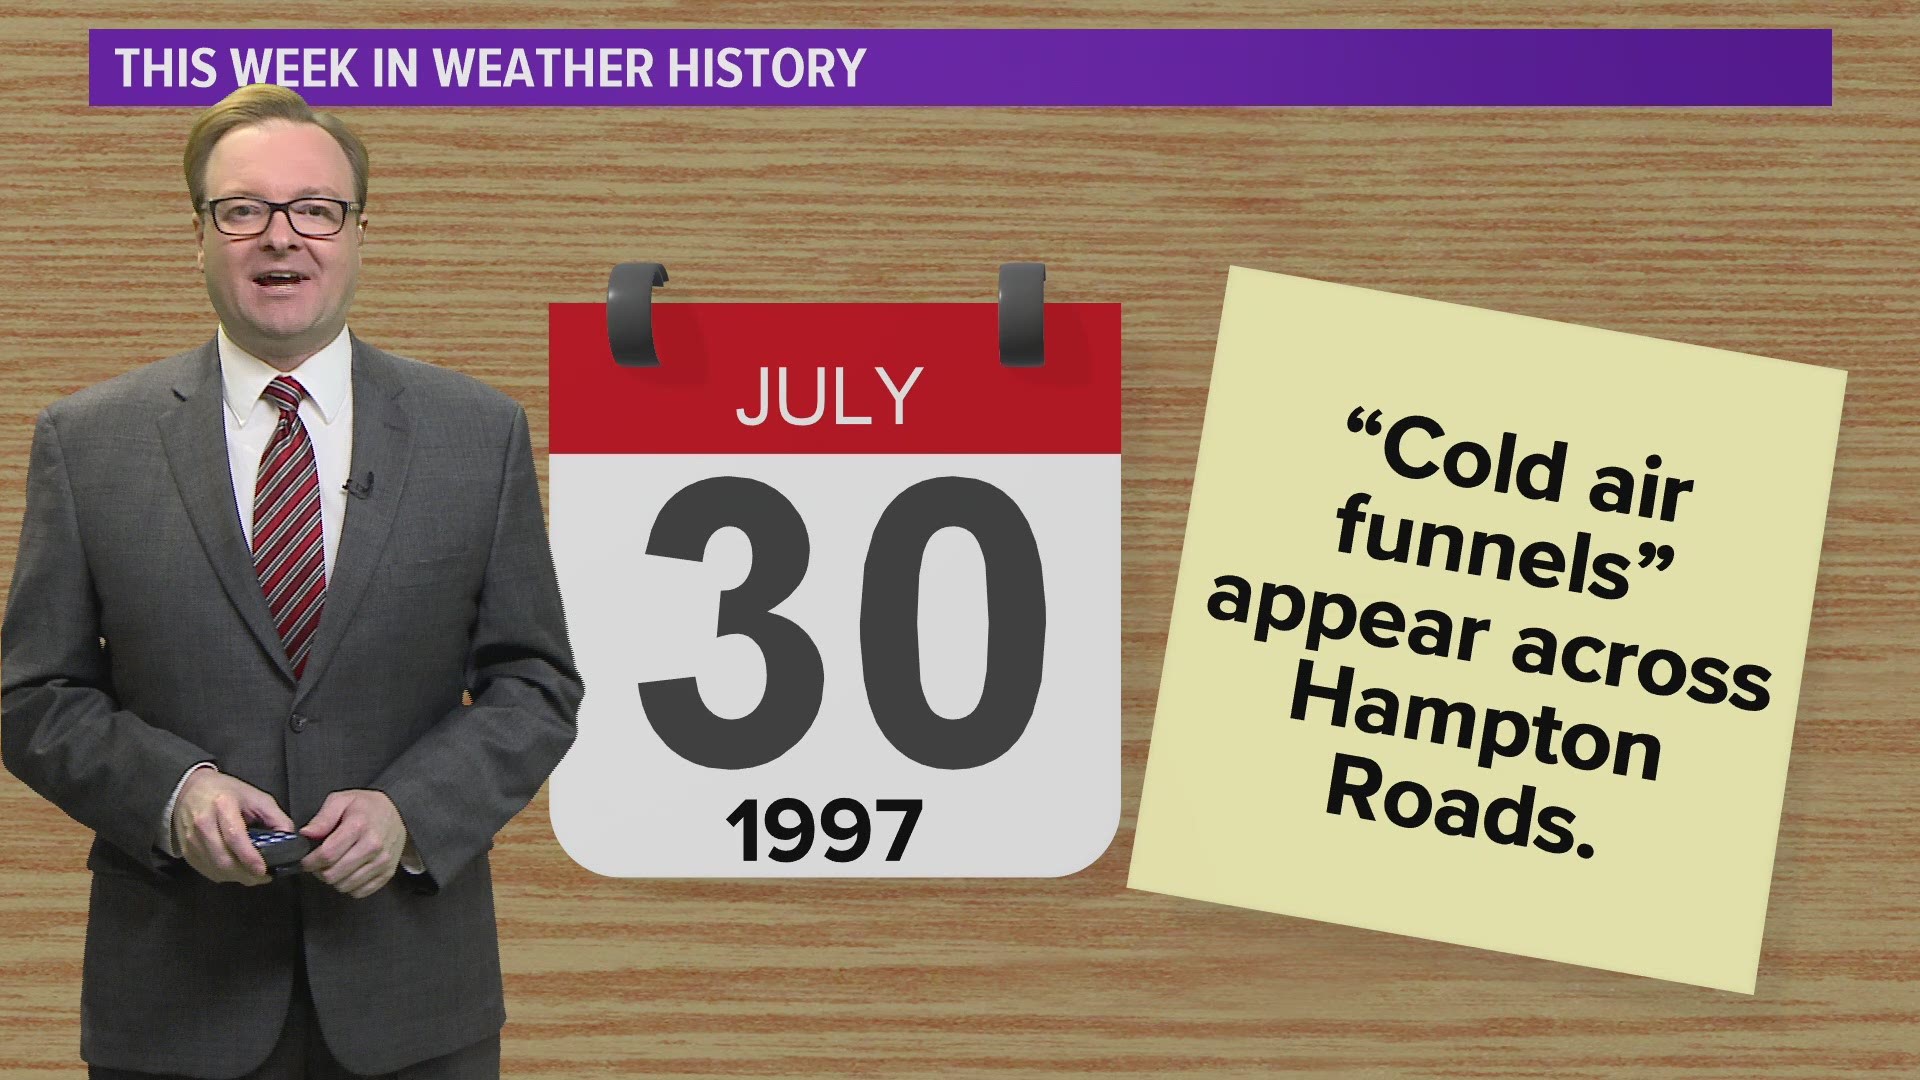 Cold air funnels create a stir over Hampton Roads on July 30, 1997.